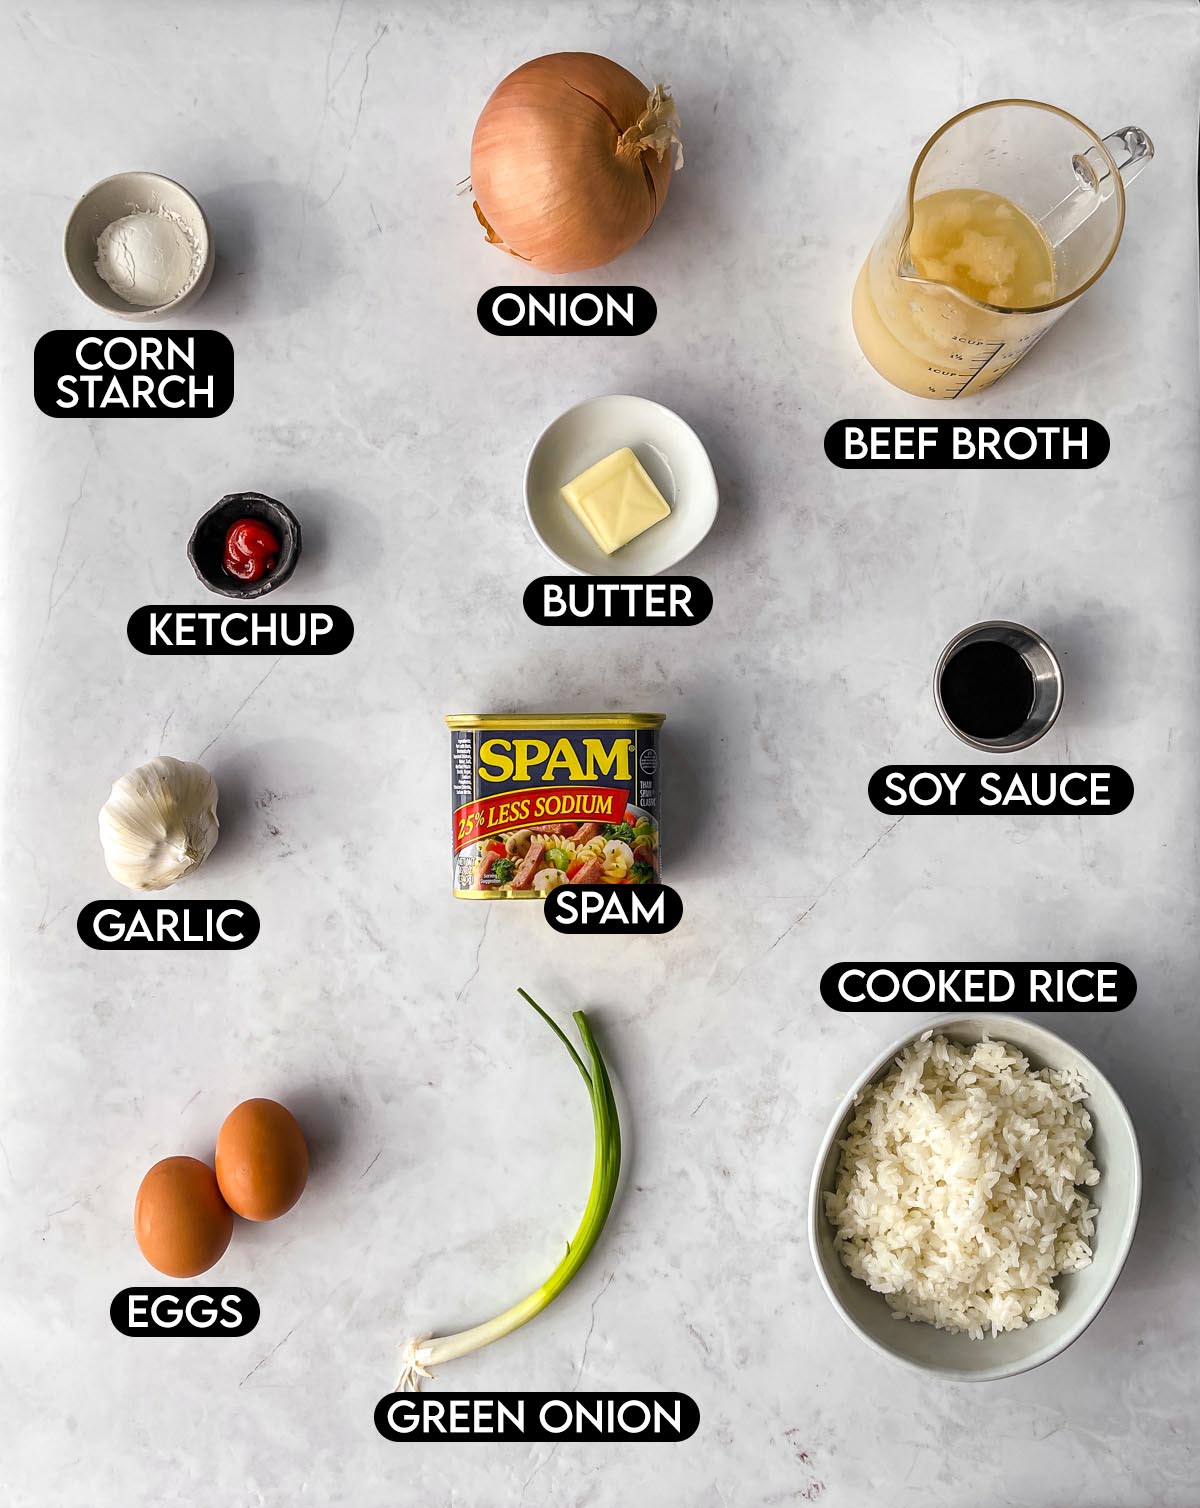 Labeled ingredients for Spam Loco Moco.